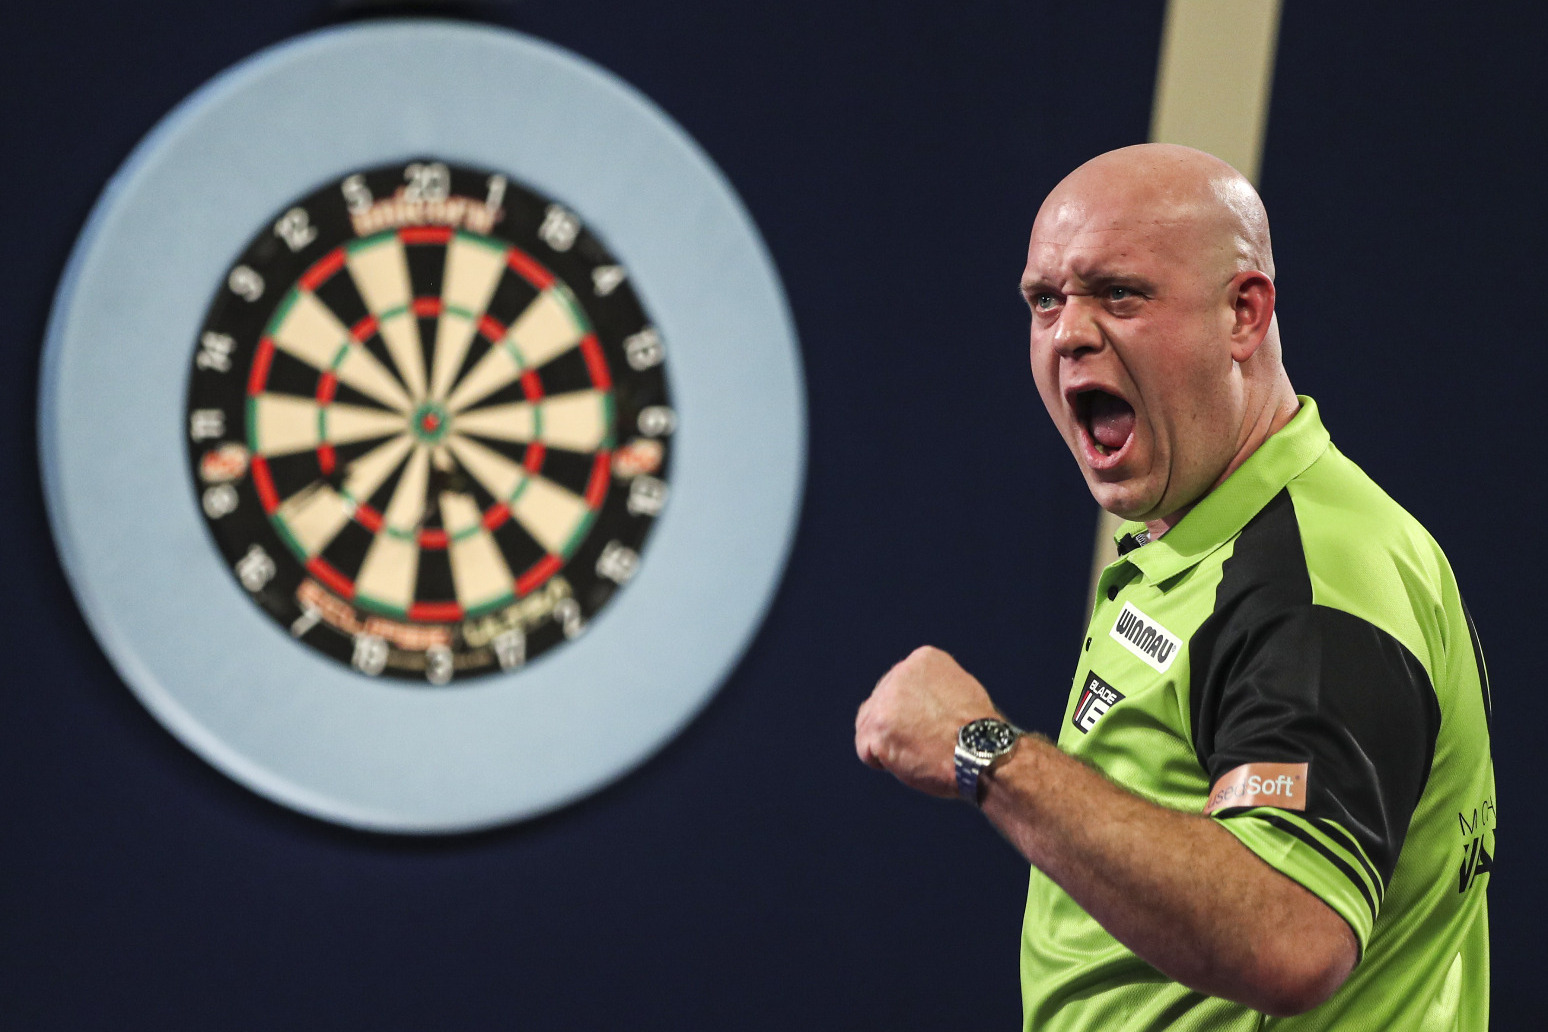 ‘Angry’ Michael Van Gerwen queries Covid controls after shock championship exit 